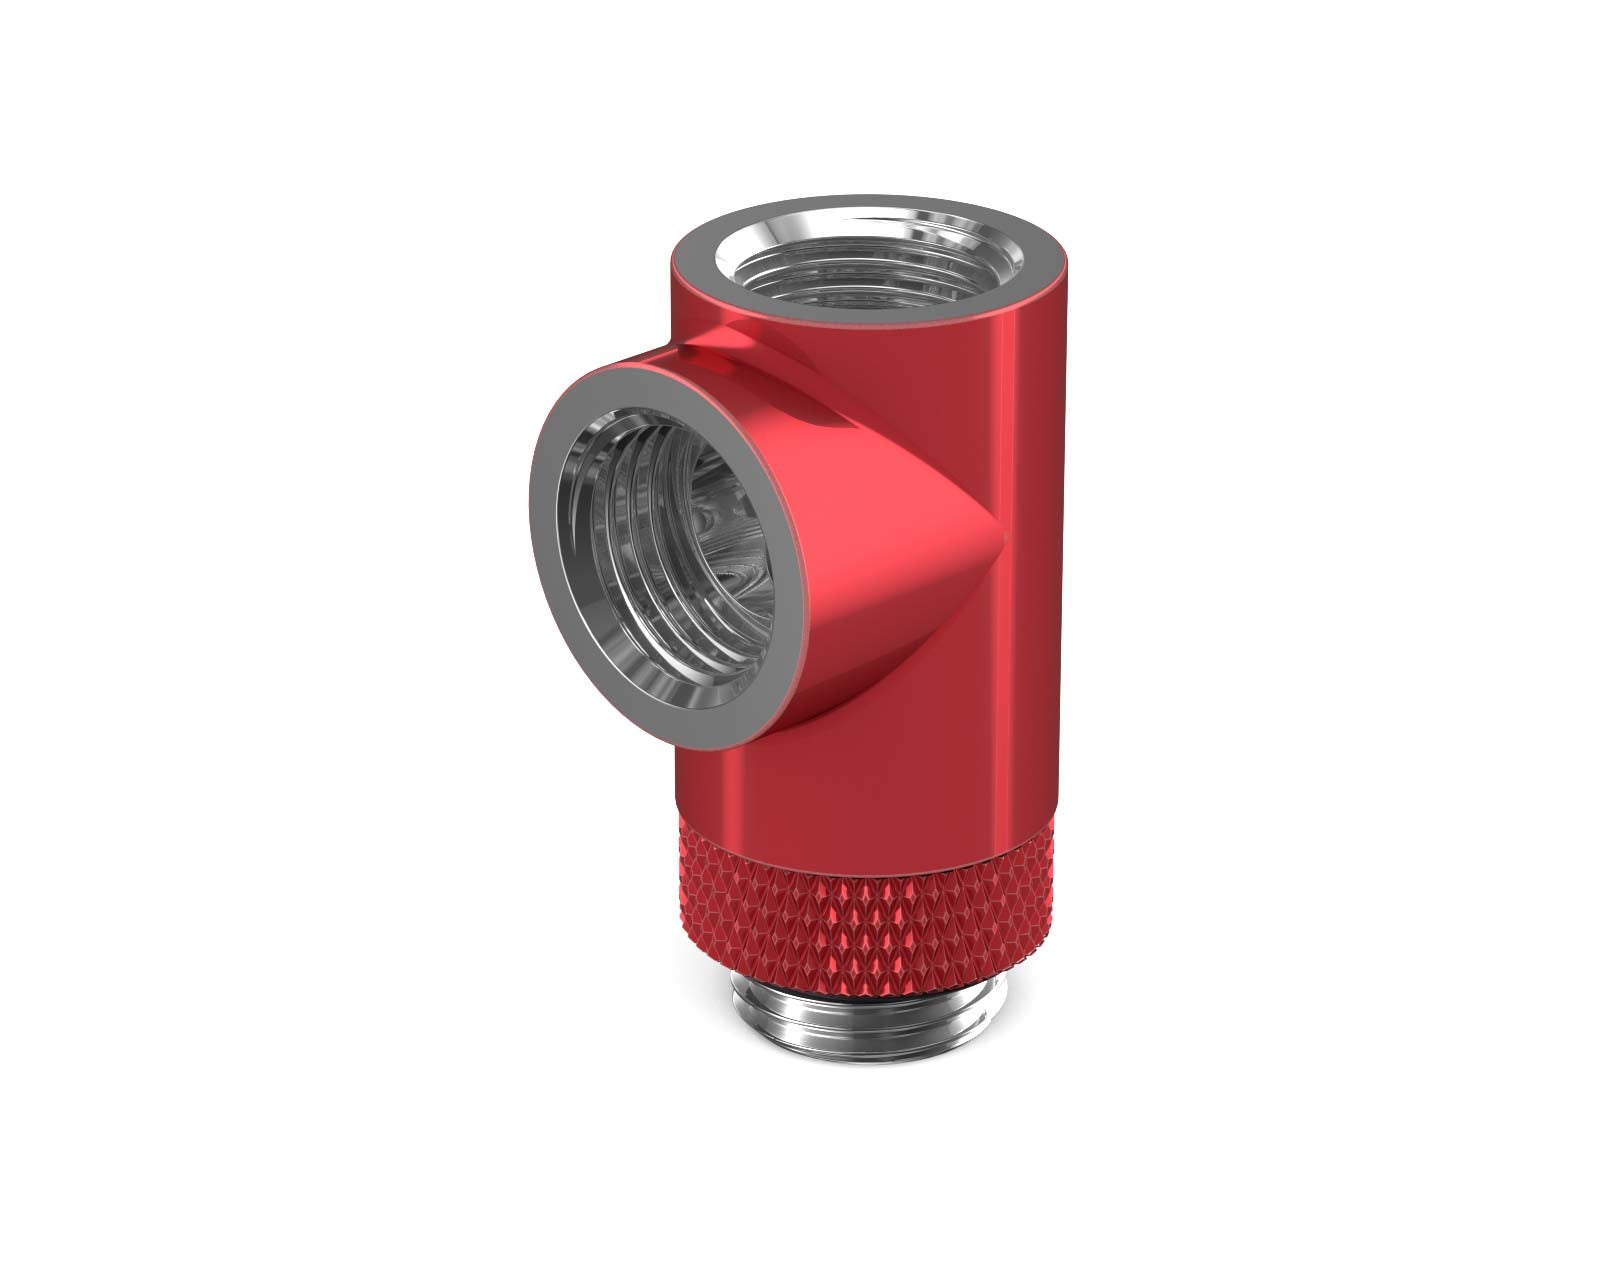 BSTOCK:PrimoChill G 1/4in. Inline Rotary 3-Way SX Female T Adapter - Candy Red - PrimoChill - KEEPING IT COOL